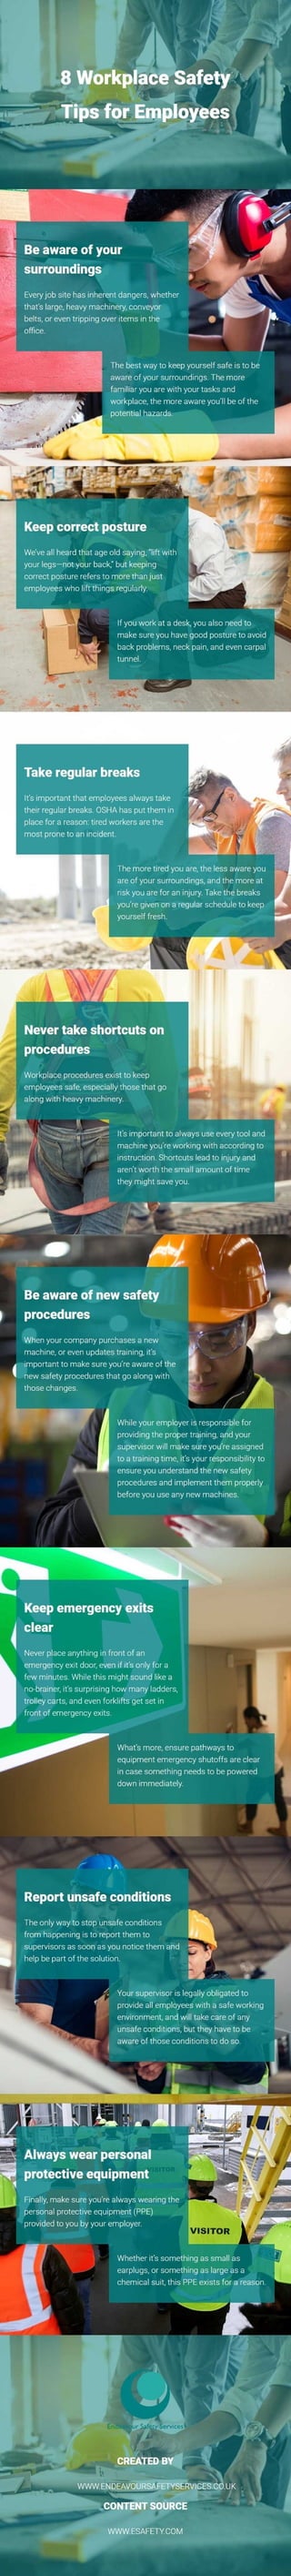 8 workplace safety tips for employees